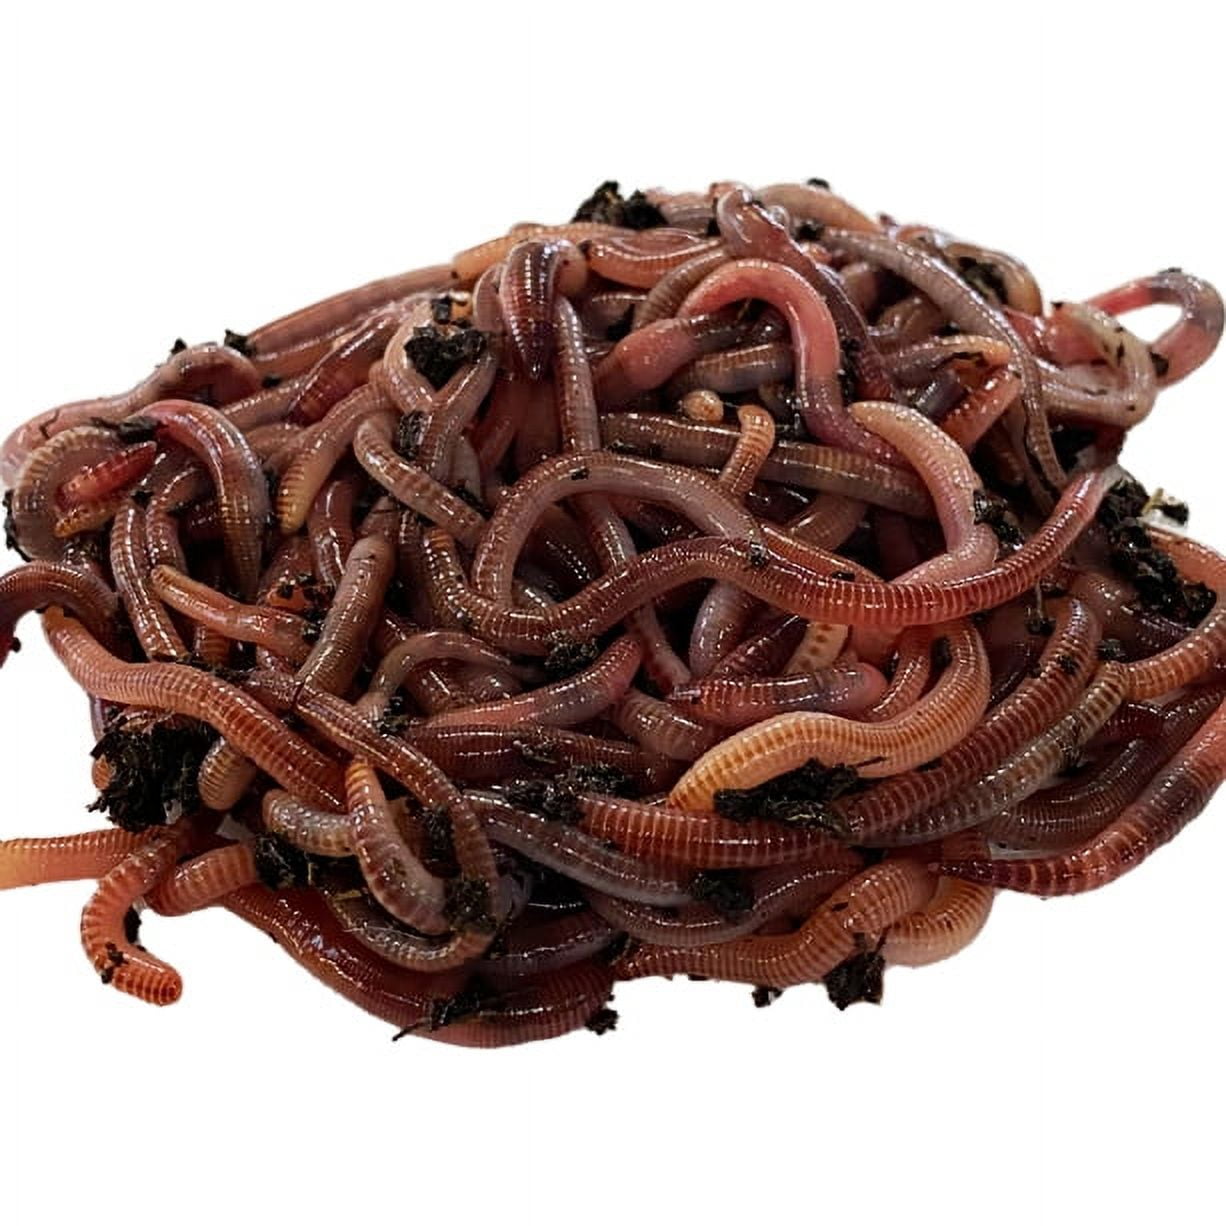 Speedy Worm - 250 Count - Live European Nightcrawlers They Are a 2 - 3  Bait Size Red Worm / Composting Worm & Panfish Worm / Live fishing Bait / Live  Worm 